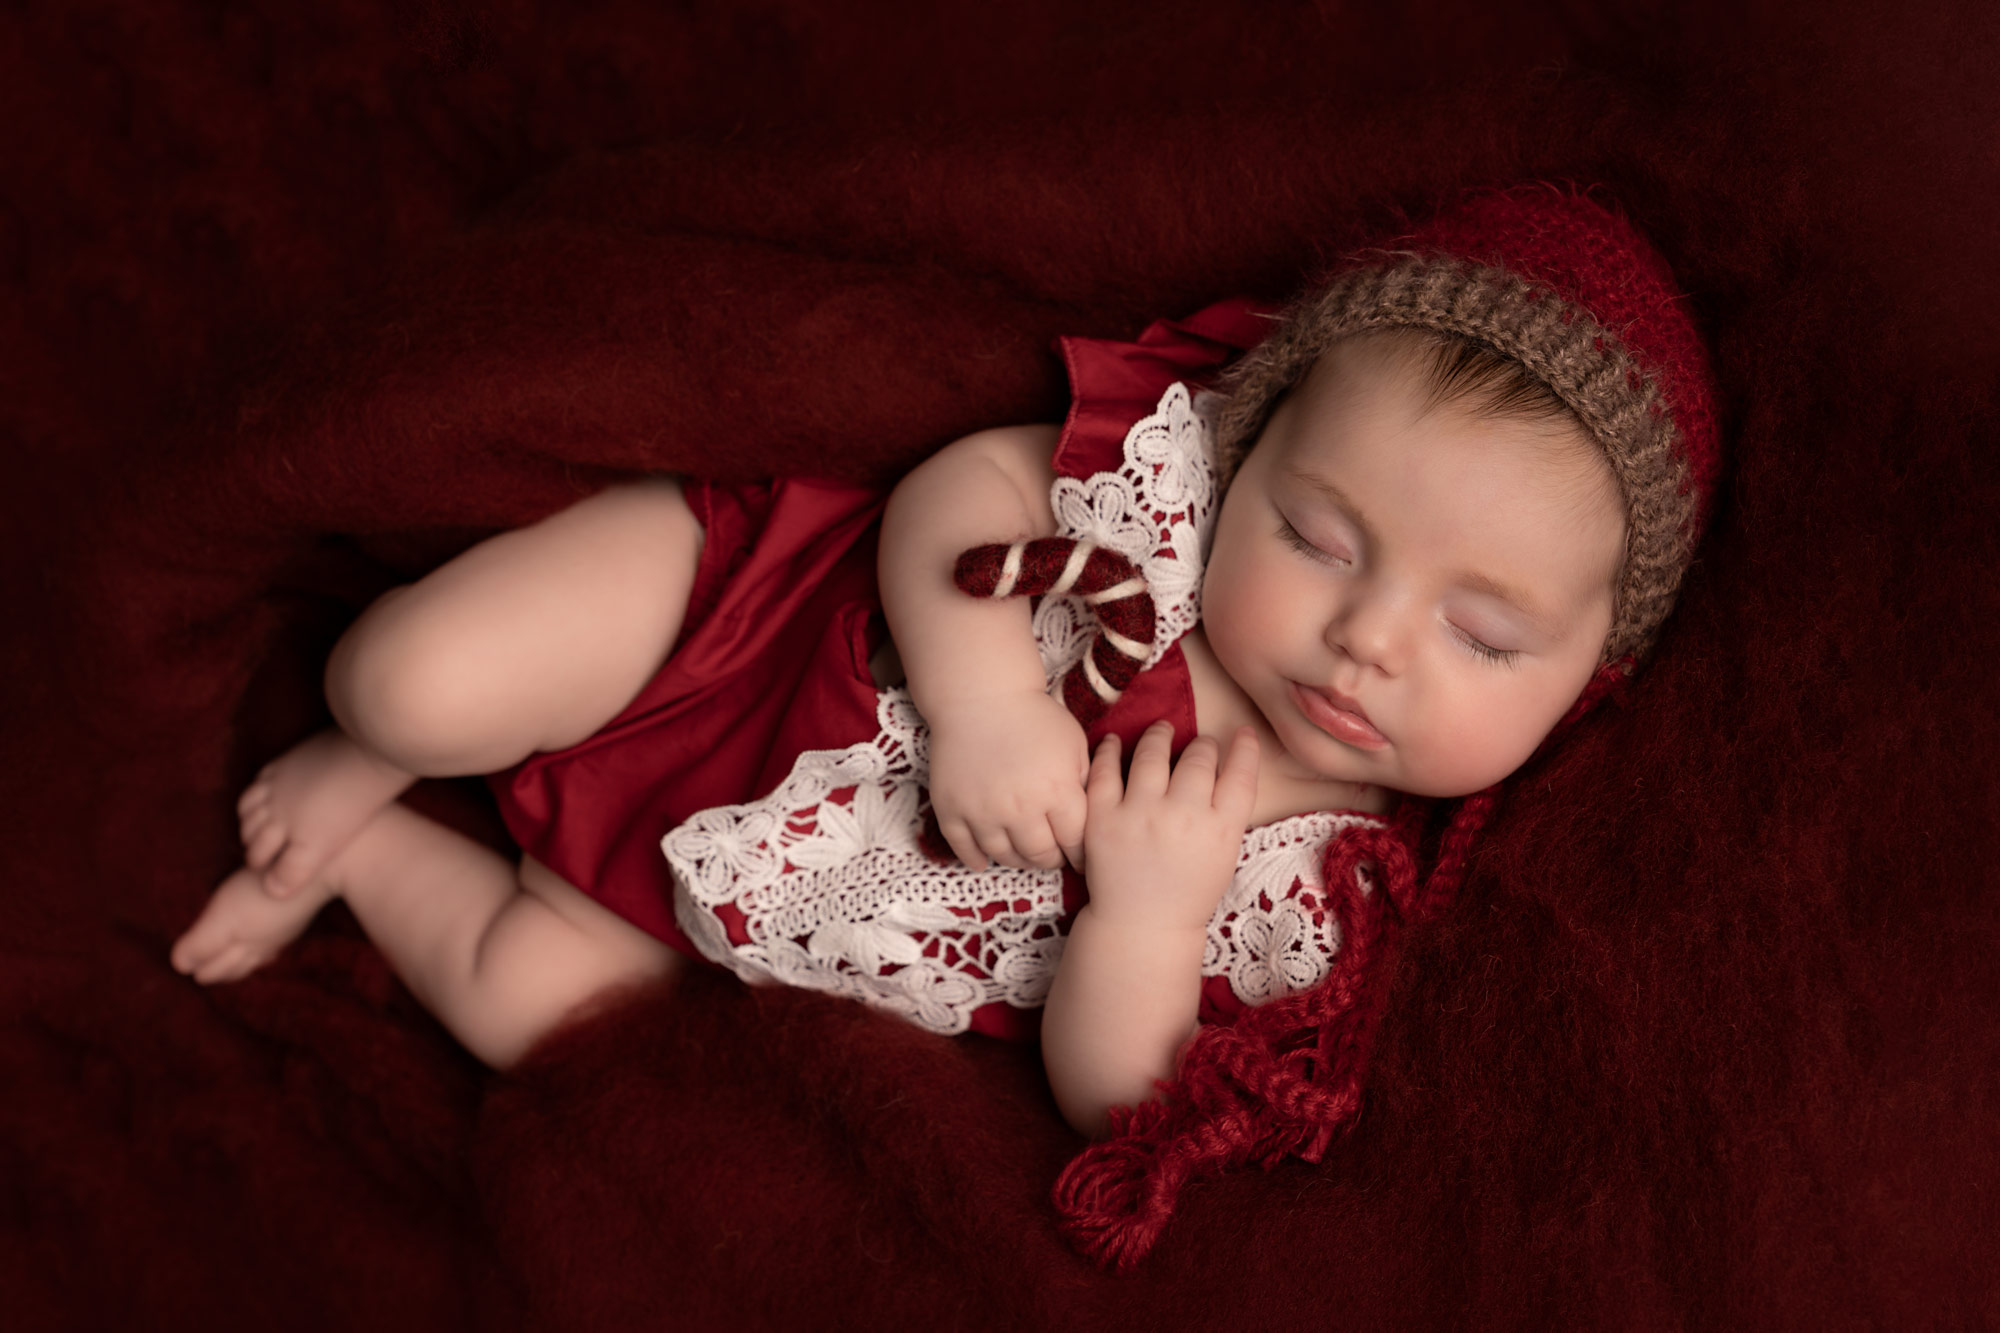 Baby girl dressed in a red Christmas outfit sleeping on a red fur blanket, cuddling a knitted candy cane.